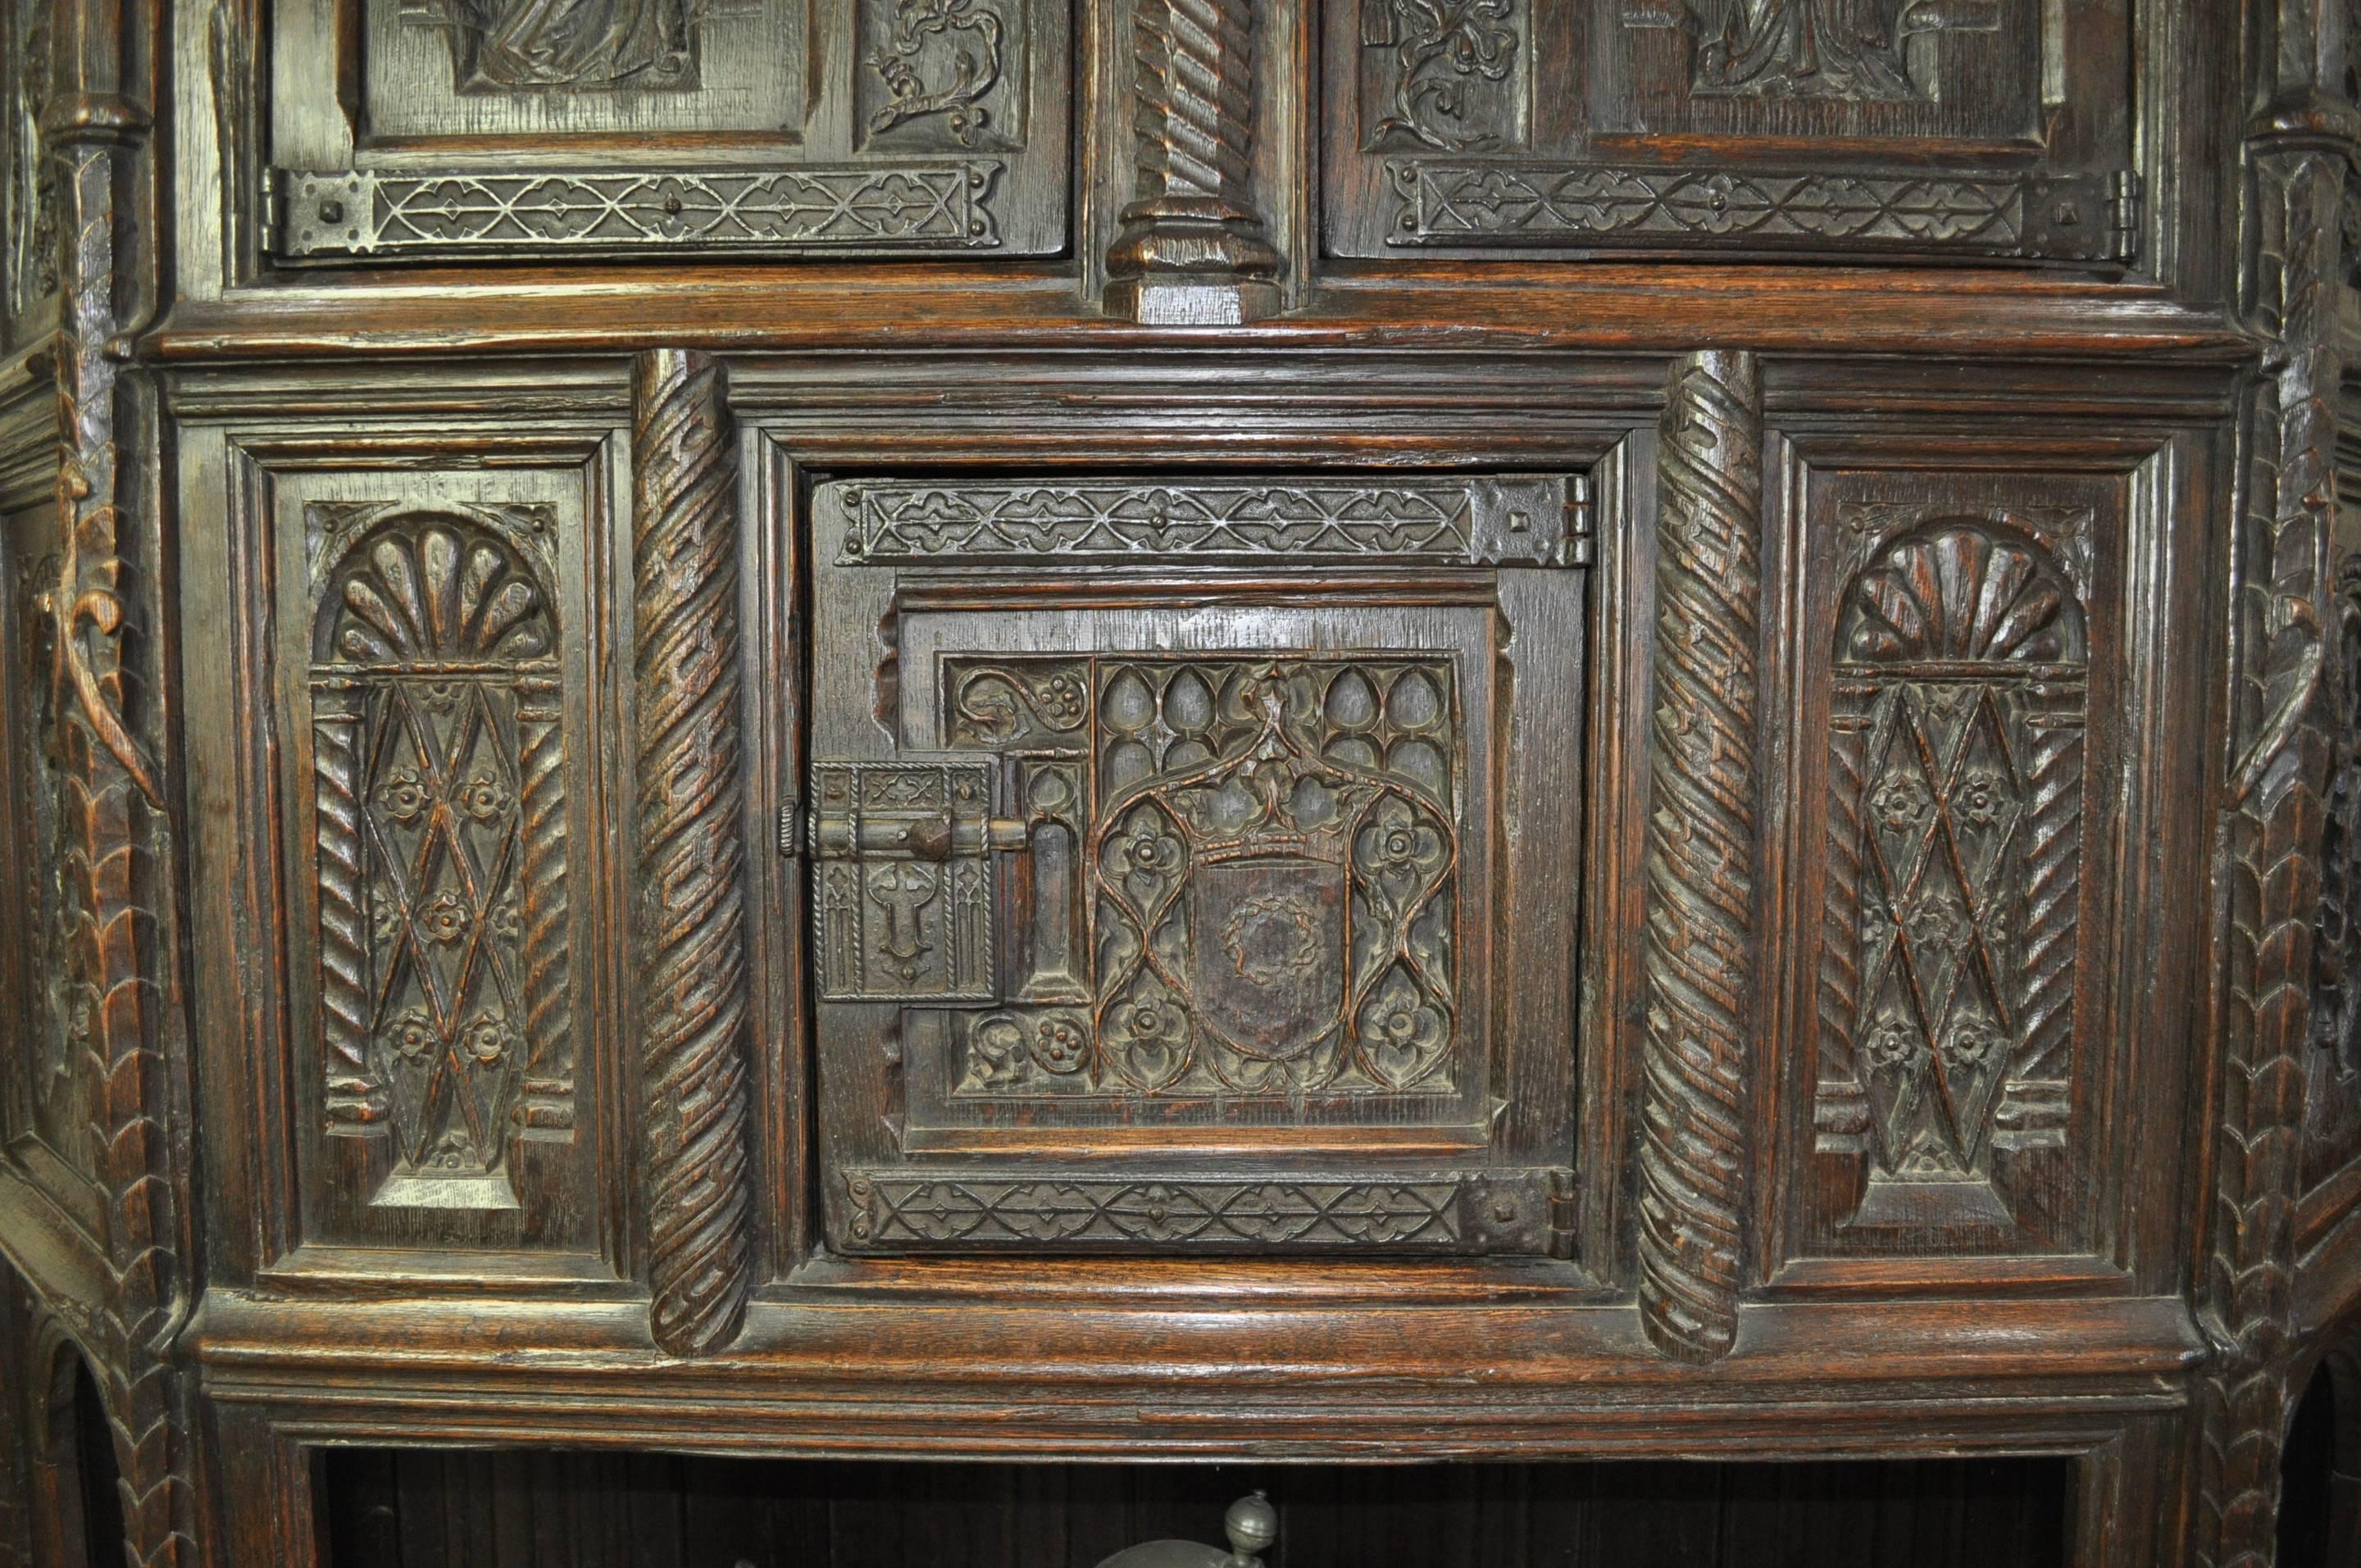 A highly imposing heavily carved 17th century French or Flemish oak credence cupboard.

Literature: For a similar piece see A HISTORY OF OAK FURNITURE by Fred Roe R.I., plate XXXIII, 